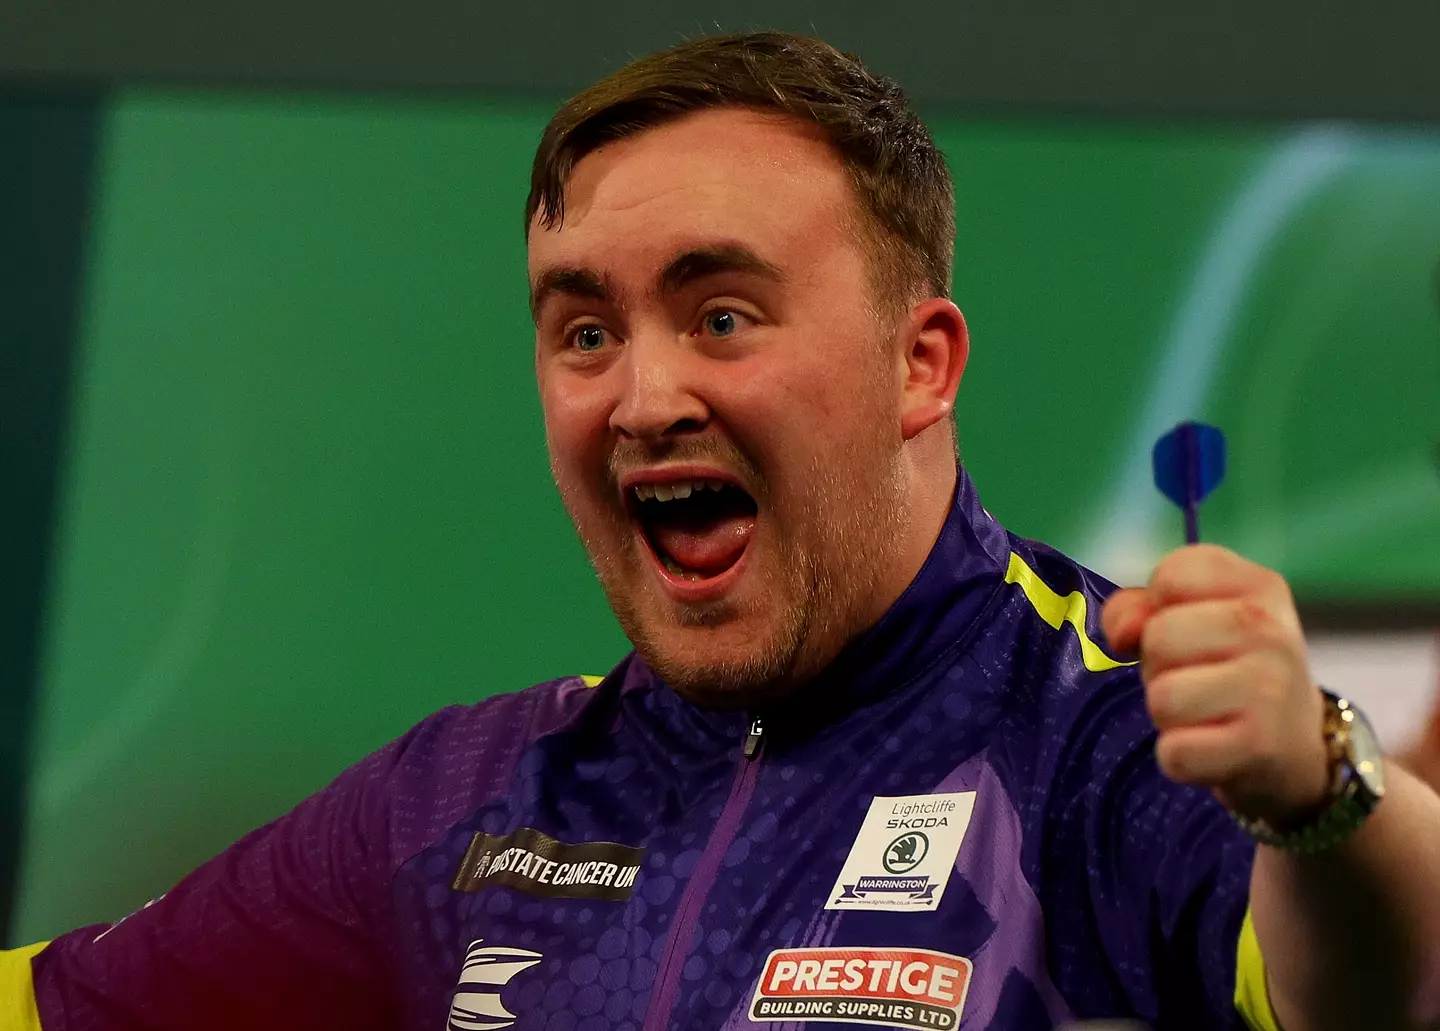 If you want to be a champion like Luke Littler then have a ham and cheese omelette in the morning and a pizza in the afternoon, and also be really good at darts.